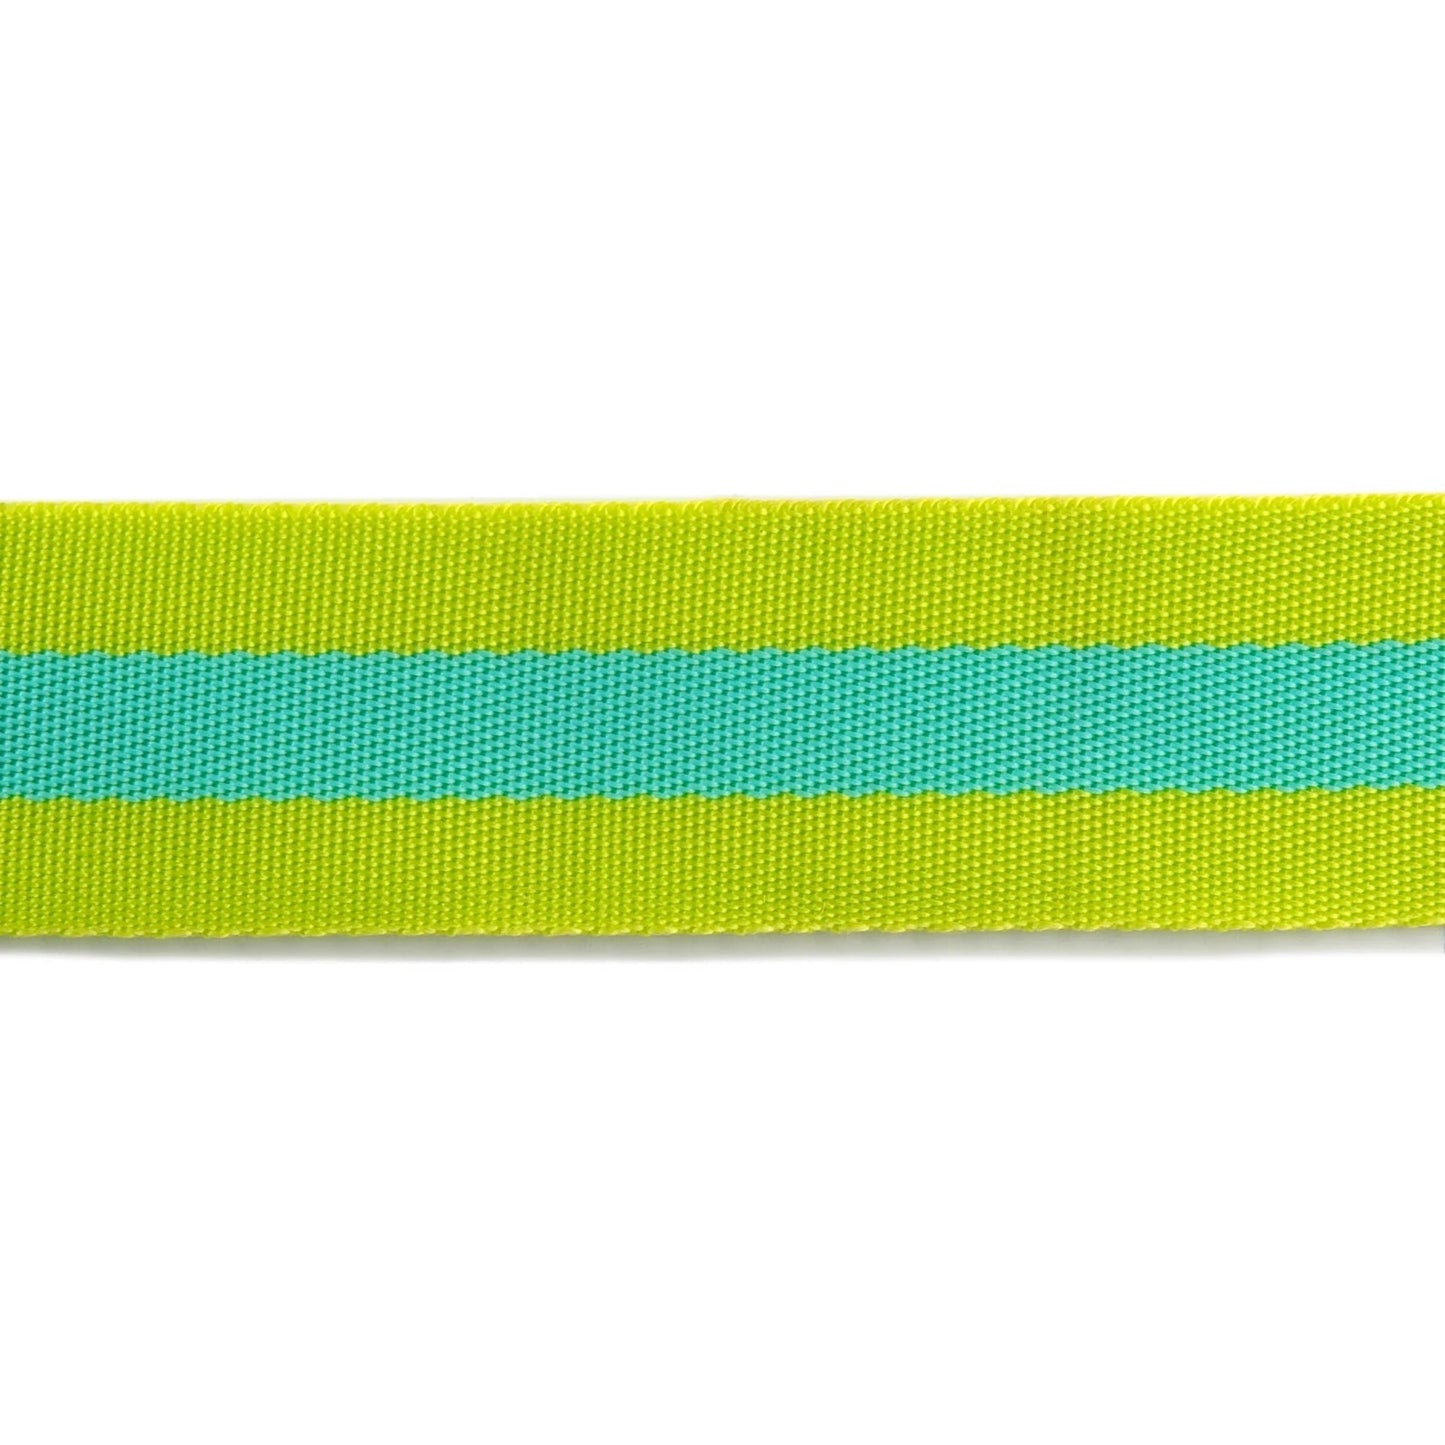 Tula Pink- Lime Zest 1.5" Webbing: Sold By the Yard- Cut Continuously